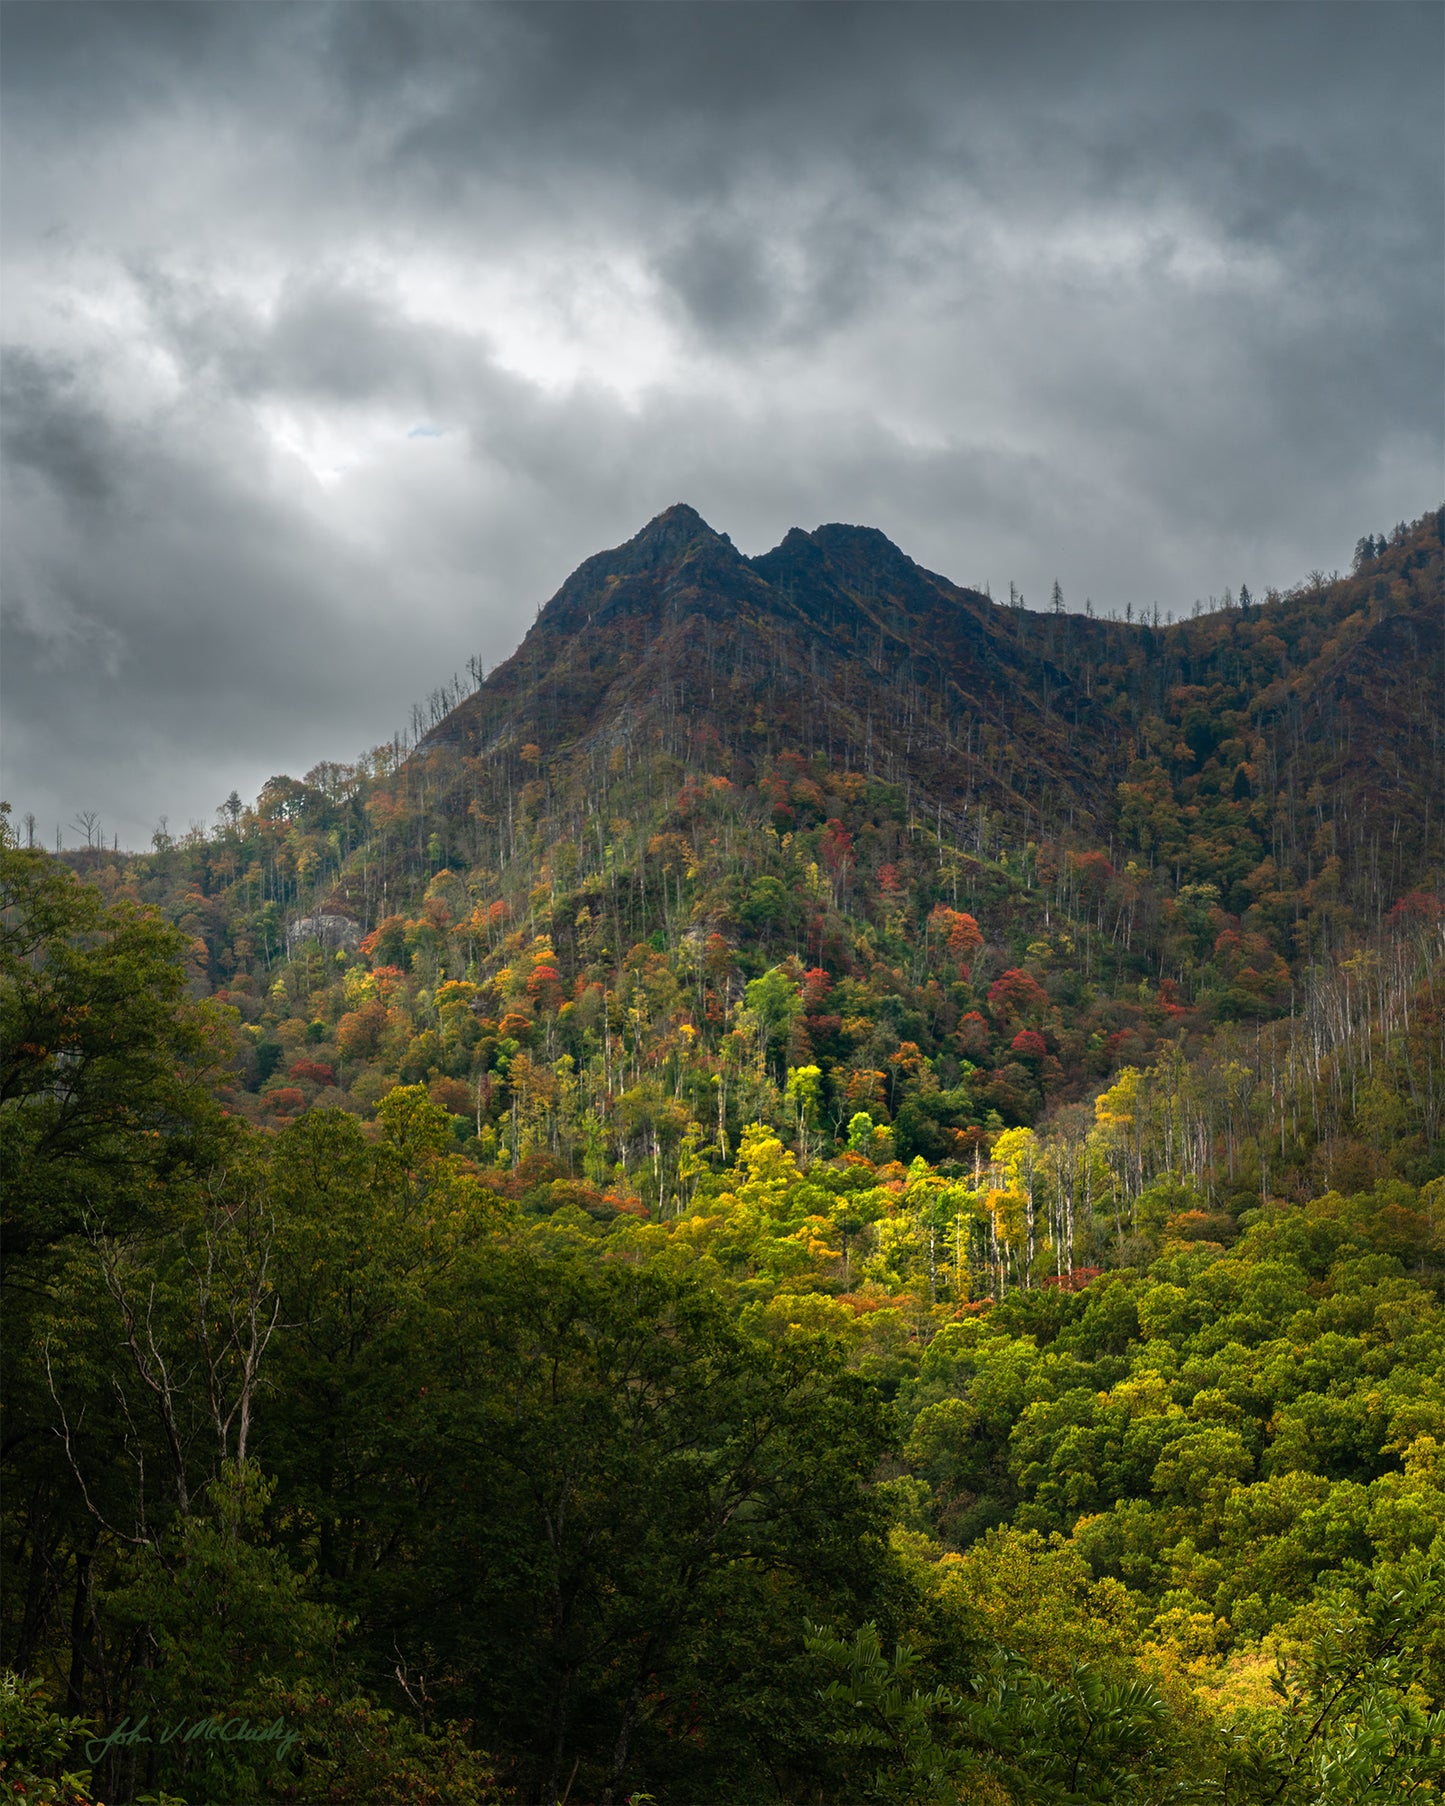 Fine art landscape print of a beam of sunlight strikes trees in fall foliage on a mountainside with dark stormclouds behind.